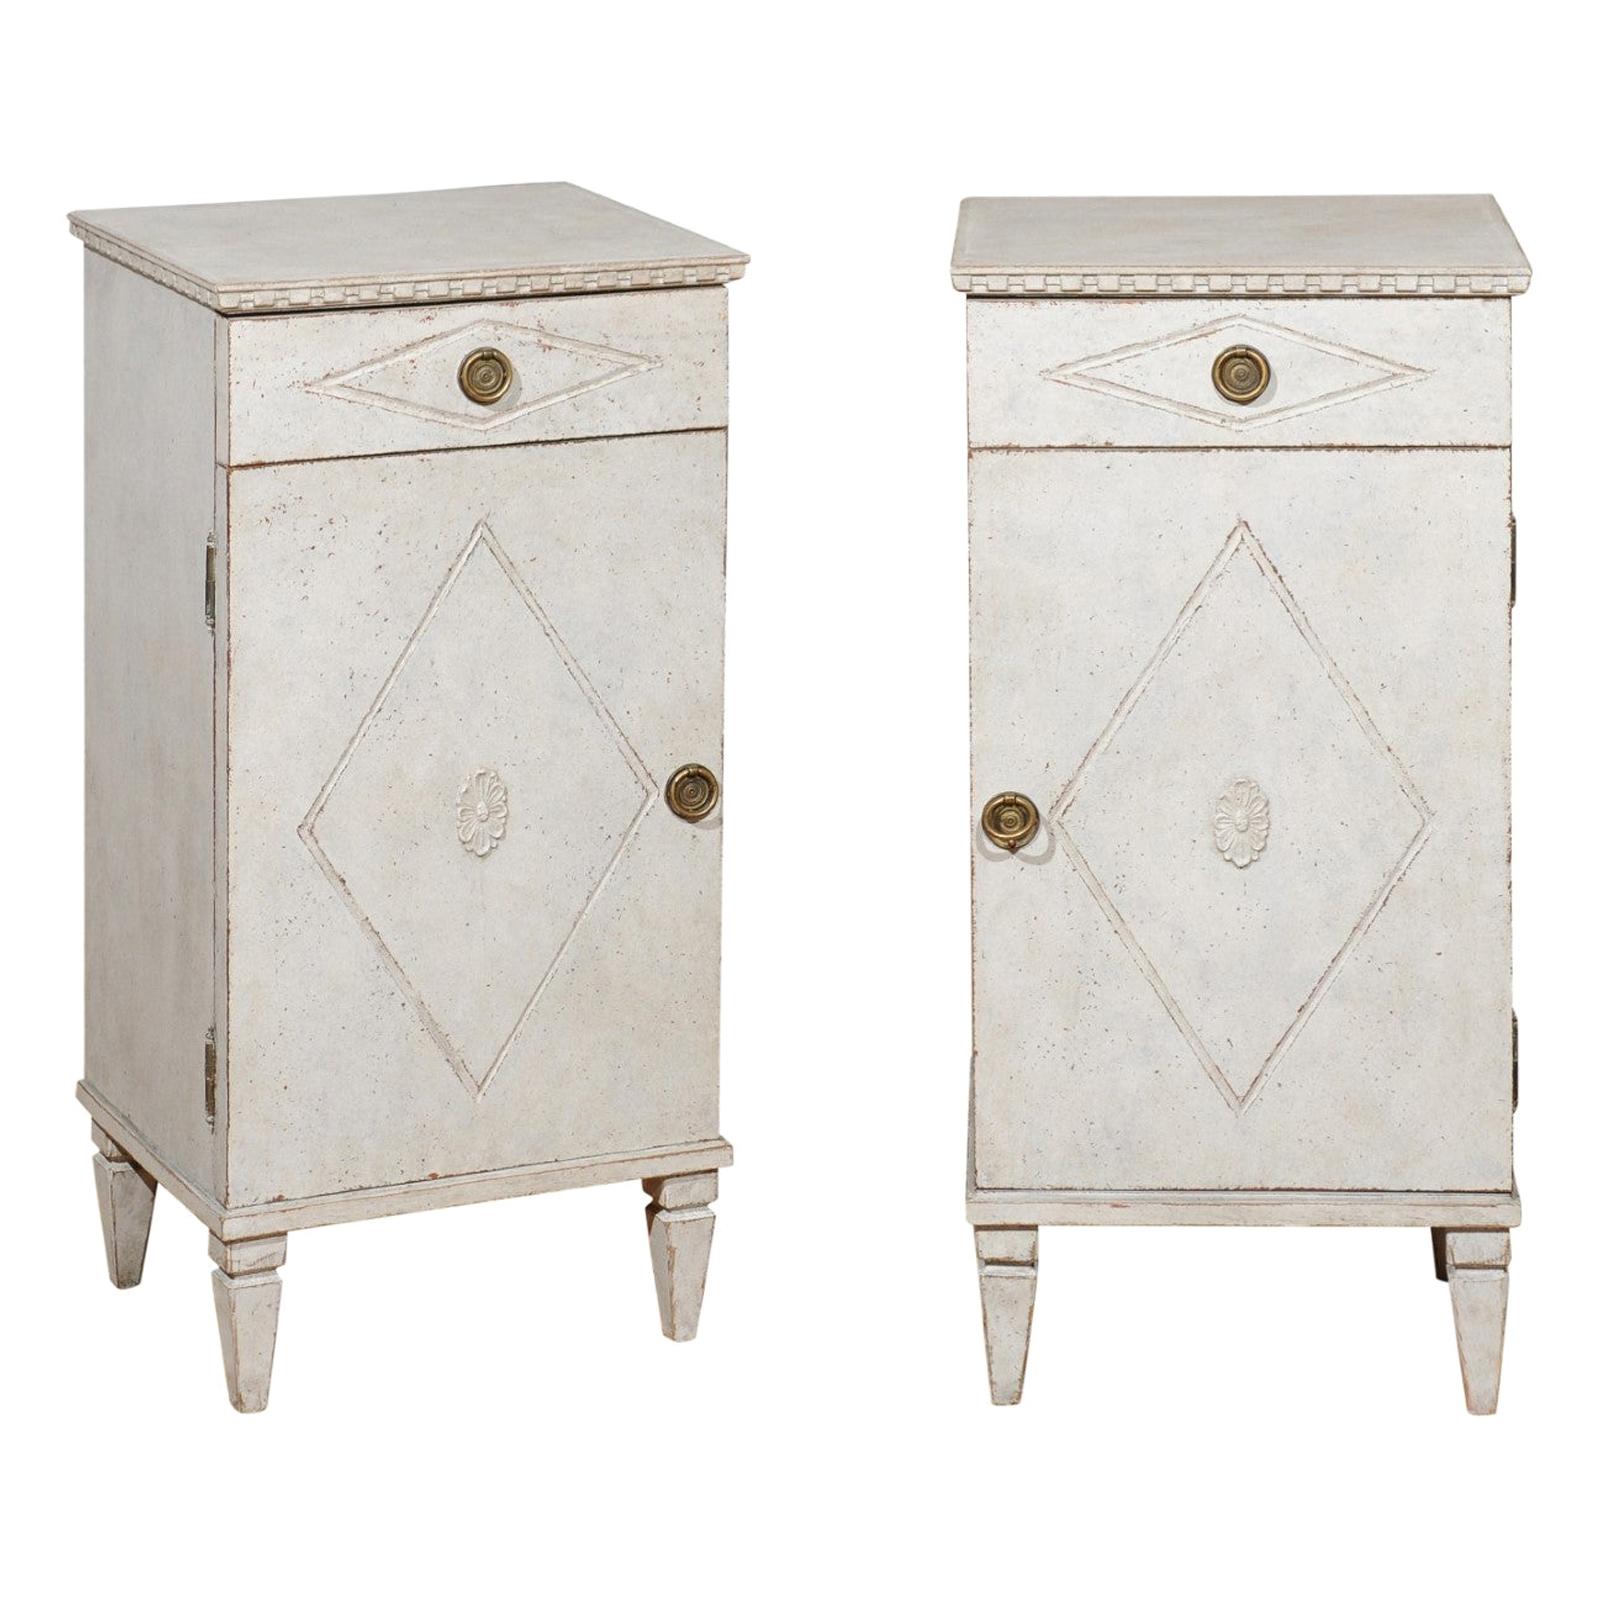 Pair of Swedish 19th Century Gustavian Style Nightstands with Drawers and Doors